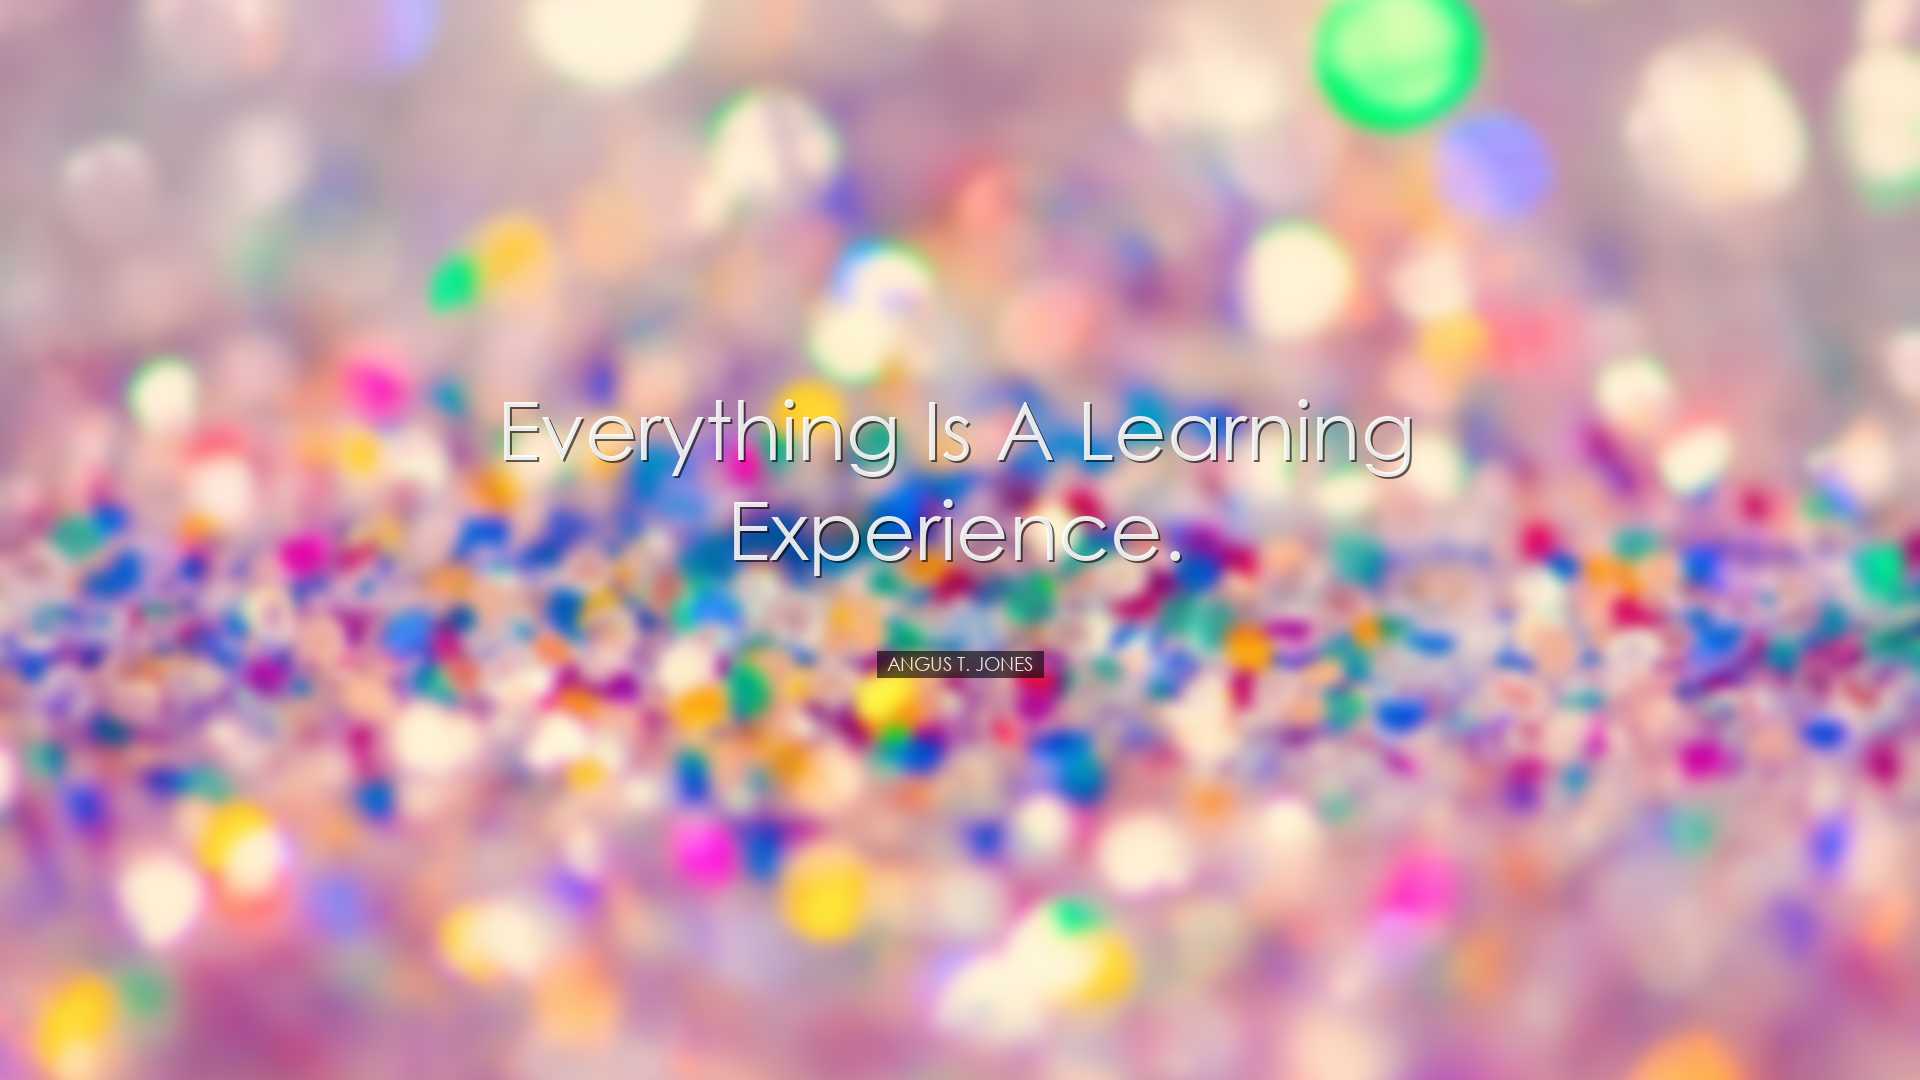 Everything is a learning experience. - Angus T. Jones